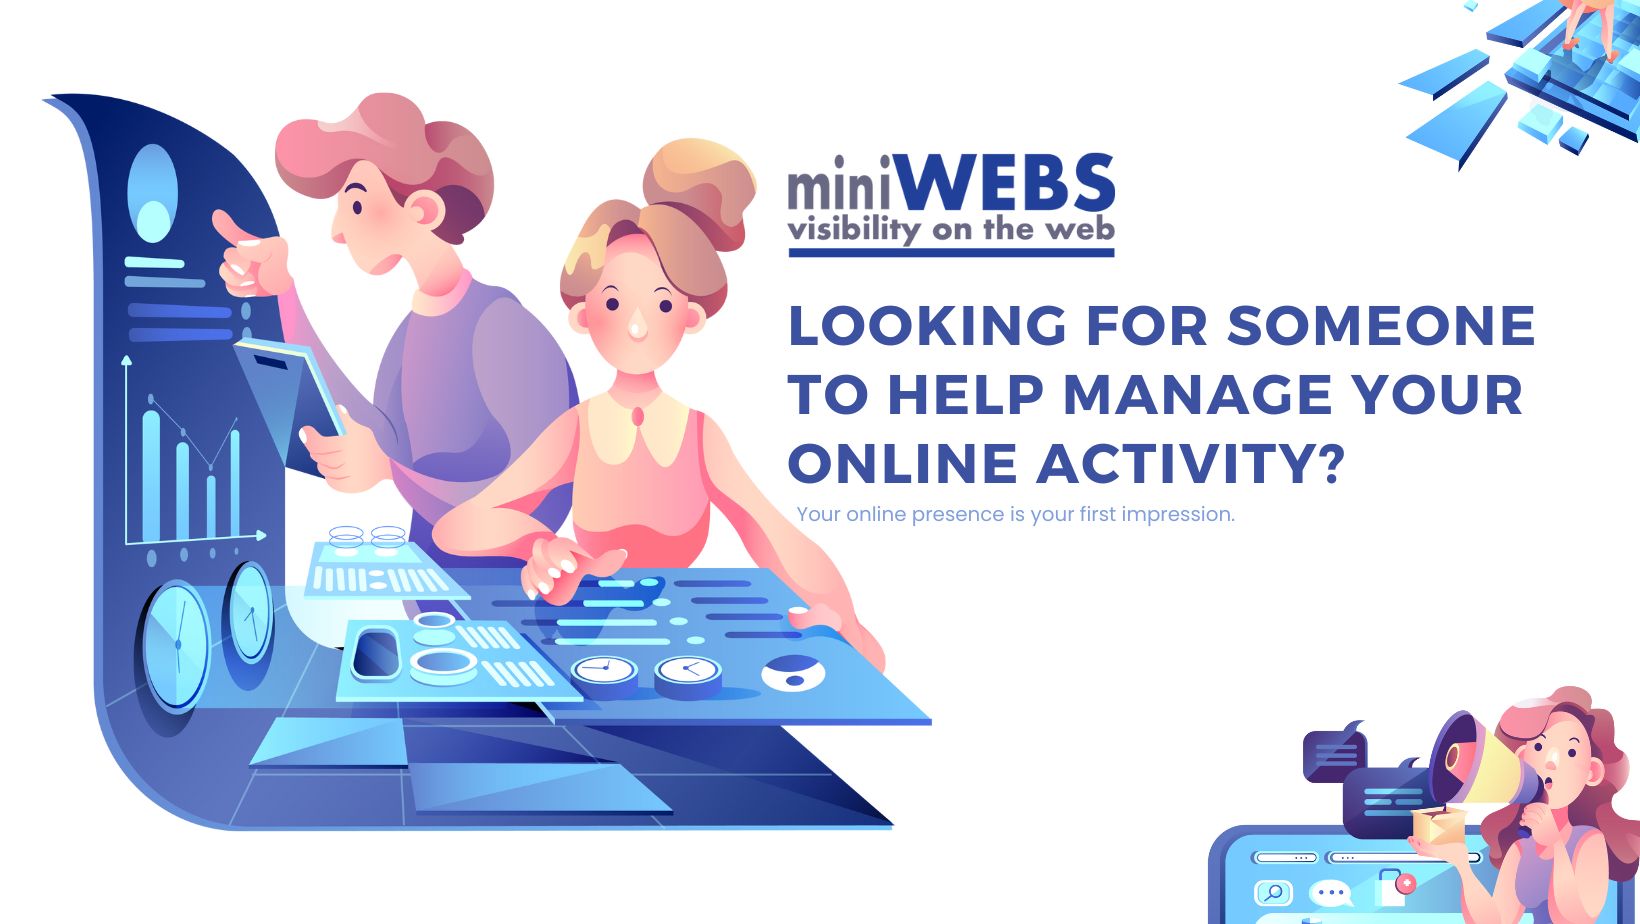 Looking for someone to help manage your online activity?